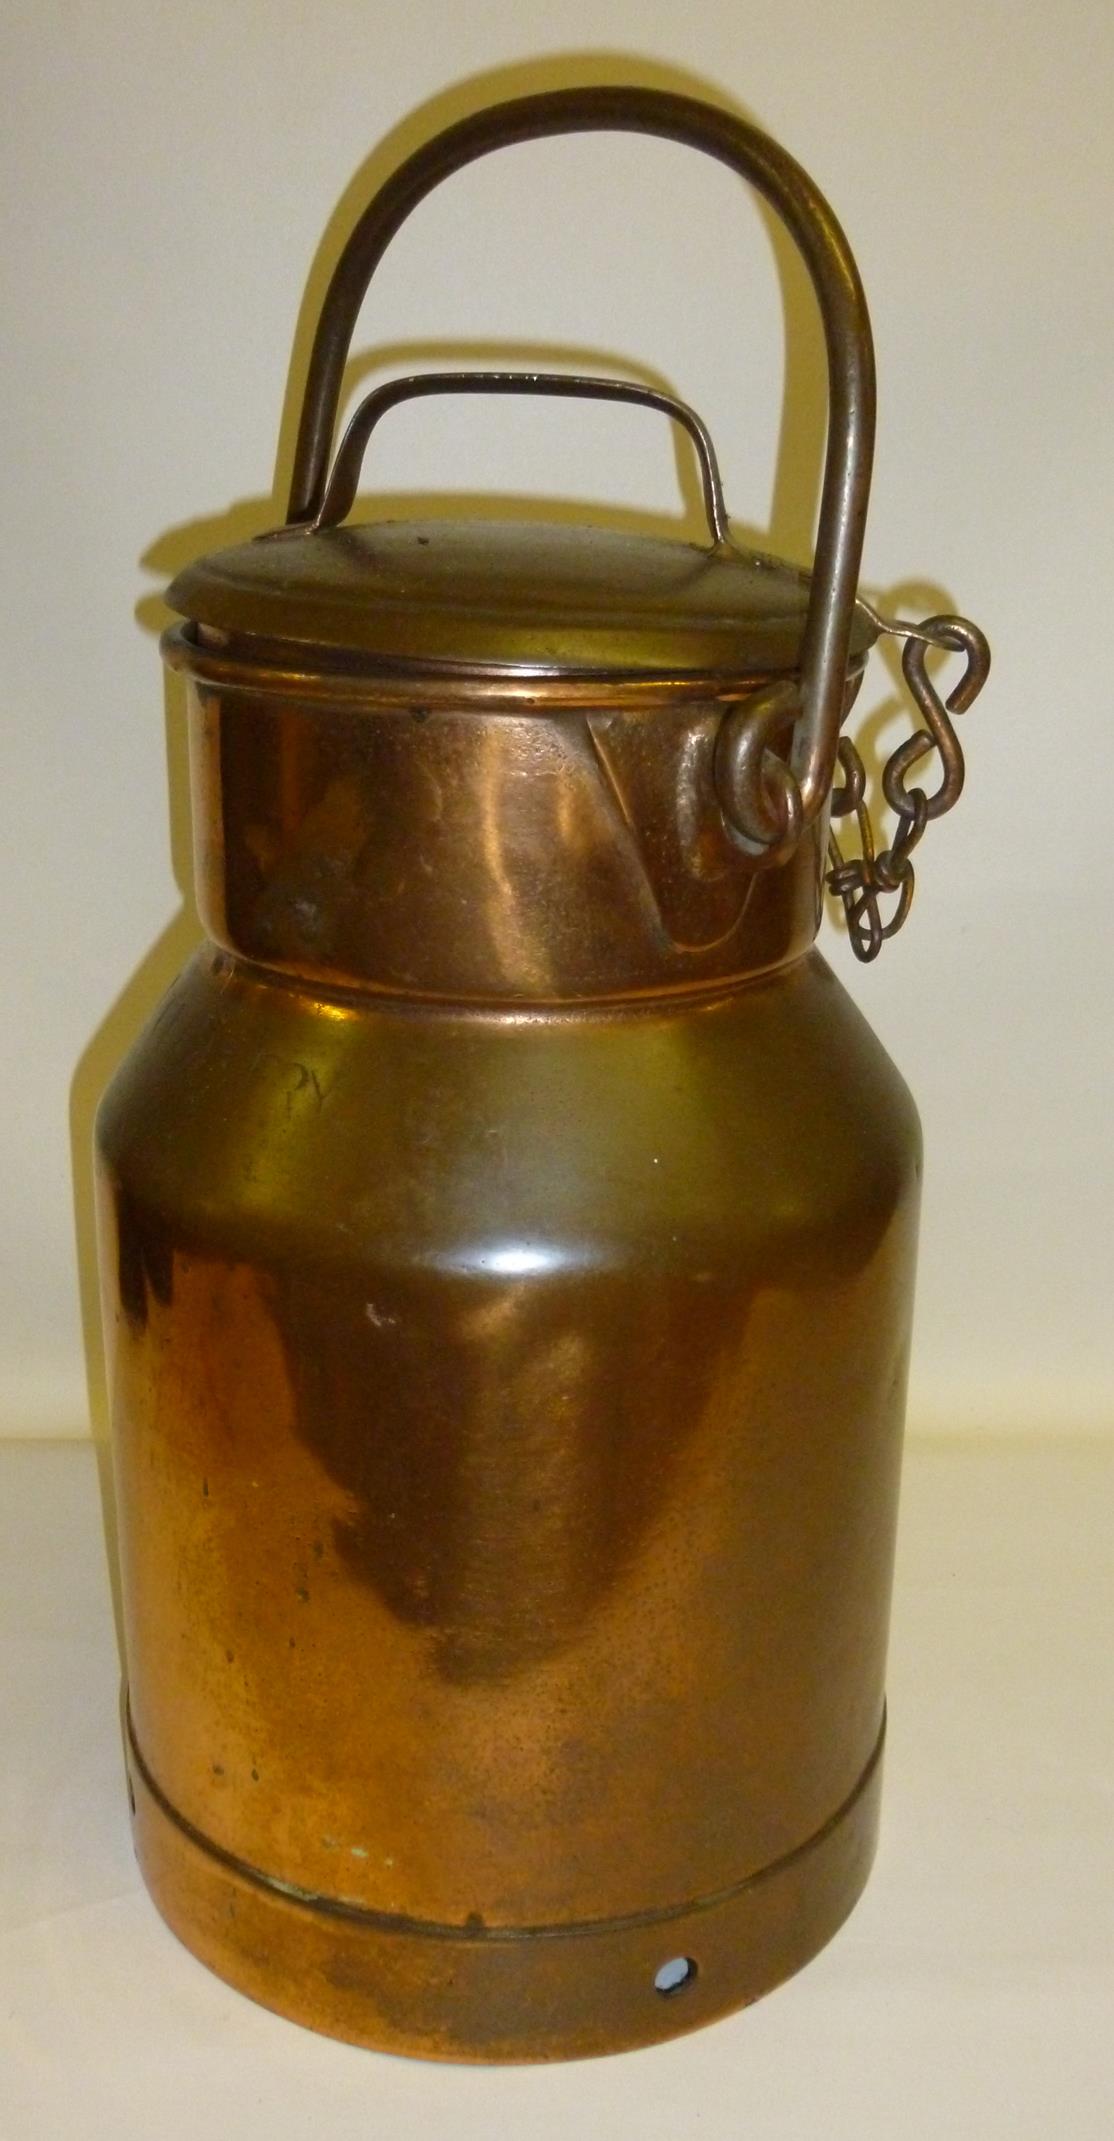 LEITH CREAMERY CO. COPPER CHURN (h: 48 cm INC. HANDLE EXTENDED) ALONG WITH A COPPER BREWERY ULLAGE